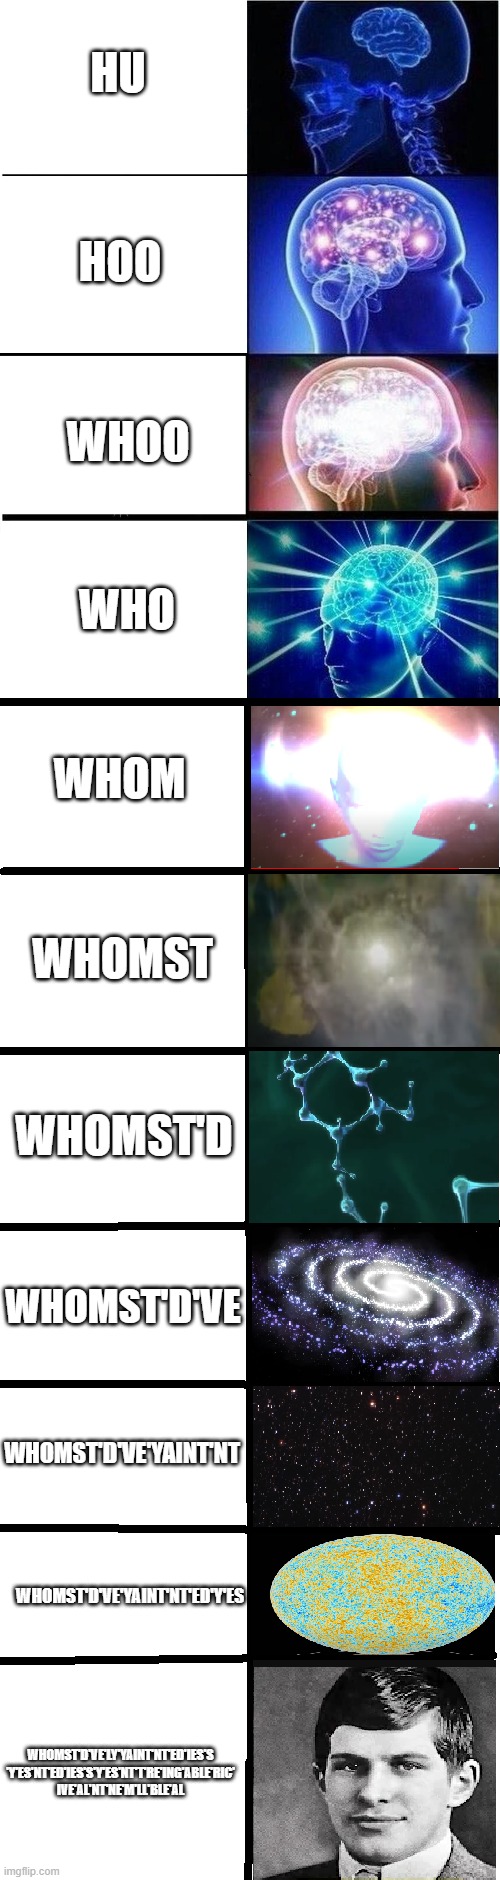 Expanding brain meme extended |  HU; HOO; WHOO; WHO; WHOM; WHOMST; WHOMST'D; WHOMST'D'VE; WHOMST'D'VE'YAINT'NT; WHOMST'D'VE'YAINT'NT'ED'Y'ES; WHOMST'D'VE'LY'YAINT'NT'ED'IES'S
'Y'ES'NT'ED'IES'S'Y'ES'NT'T'RE'ING'ABLE'RIC'
IVE'AL'NT'NE'M'LL'BLE'AL | image tagged in expanding brain,expanding brain 5 panel,yeah this is big brain time | made w/ Imgflip meme maker